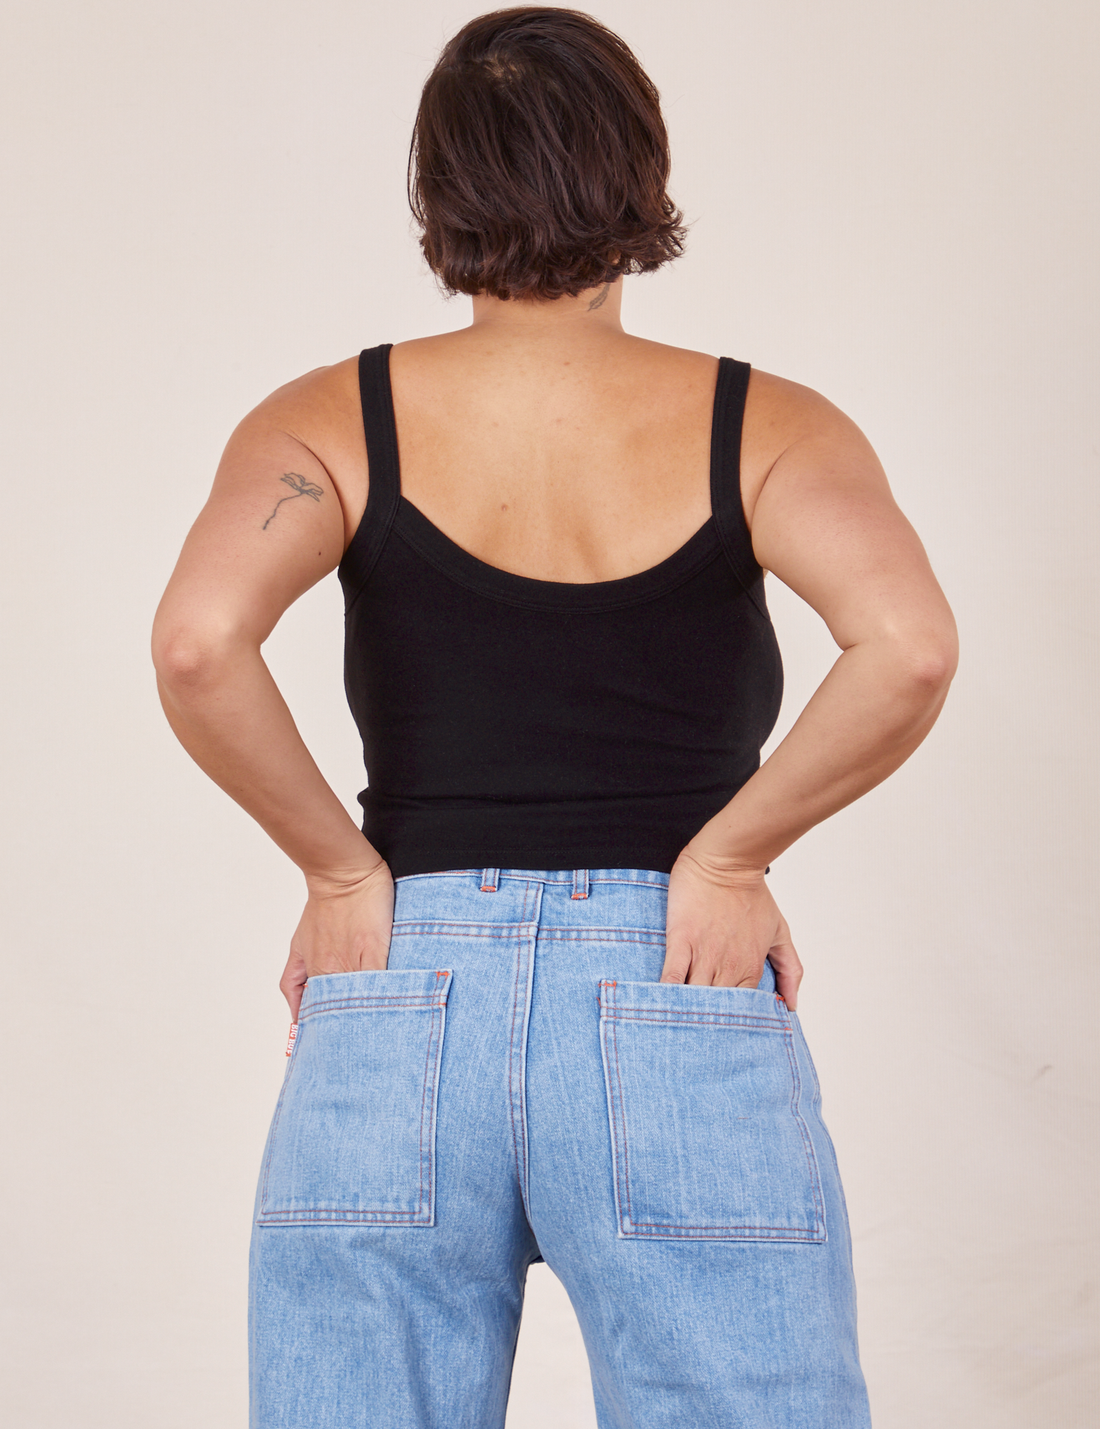 Back view of Cropped Cami in Basic Black and light wash Sailor Jeans worn by Tiara. She has both her hands in the back pant pockets.